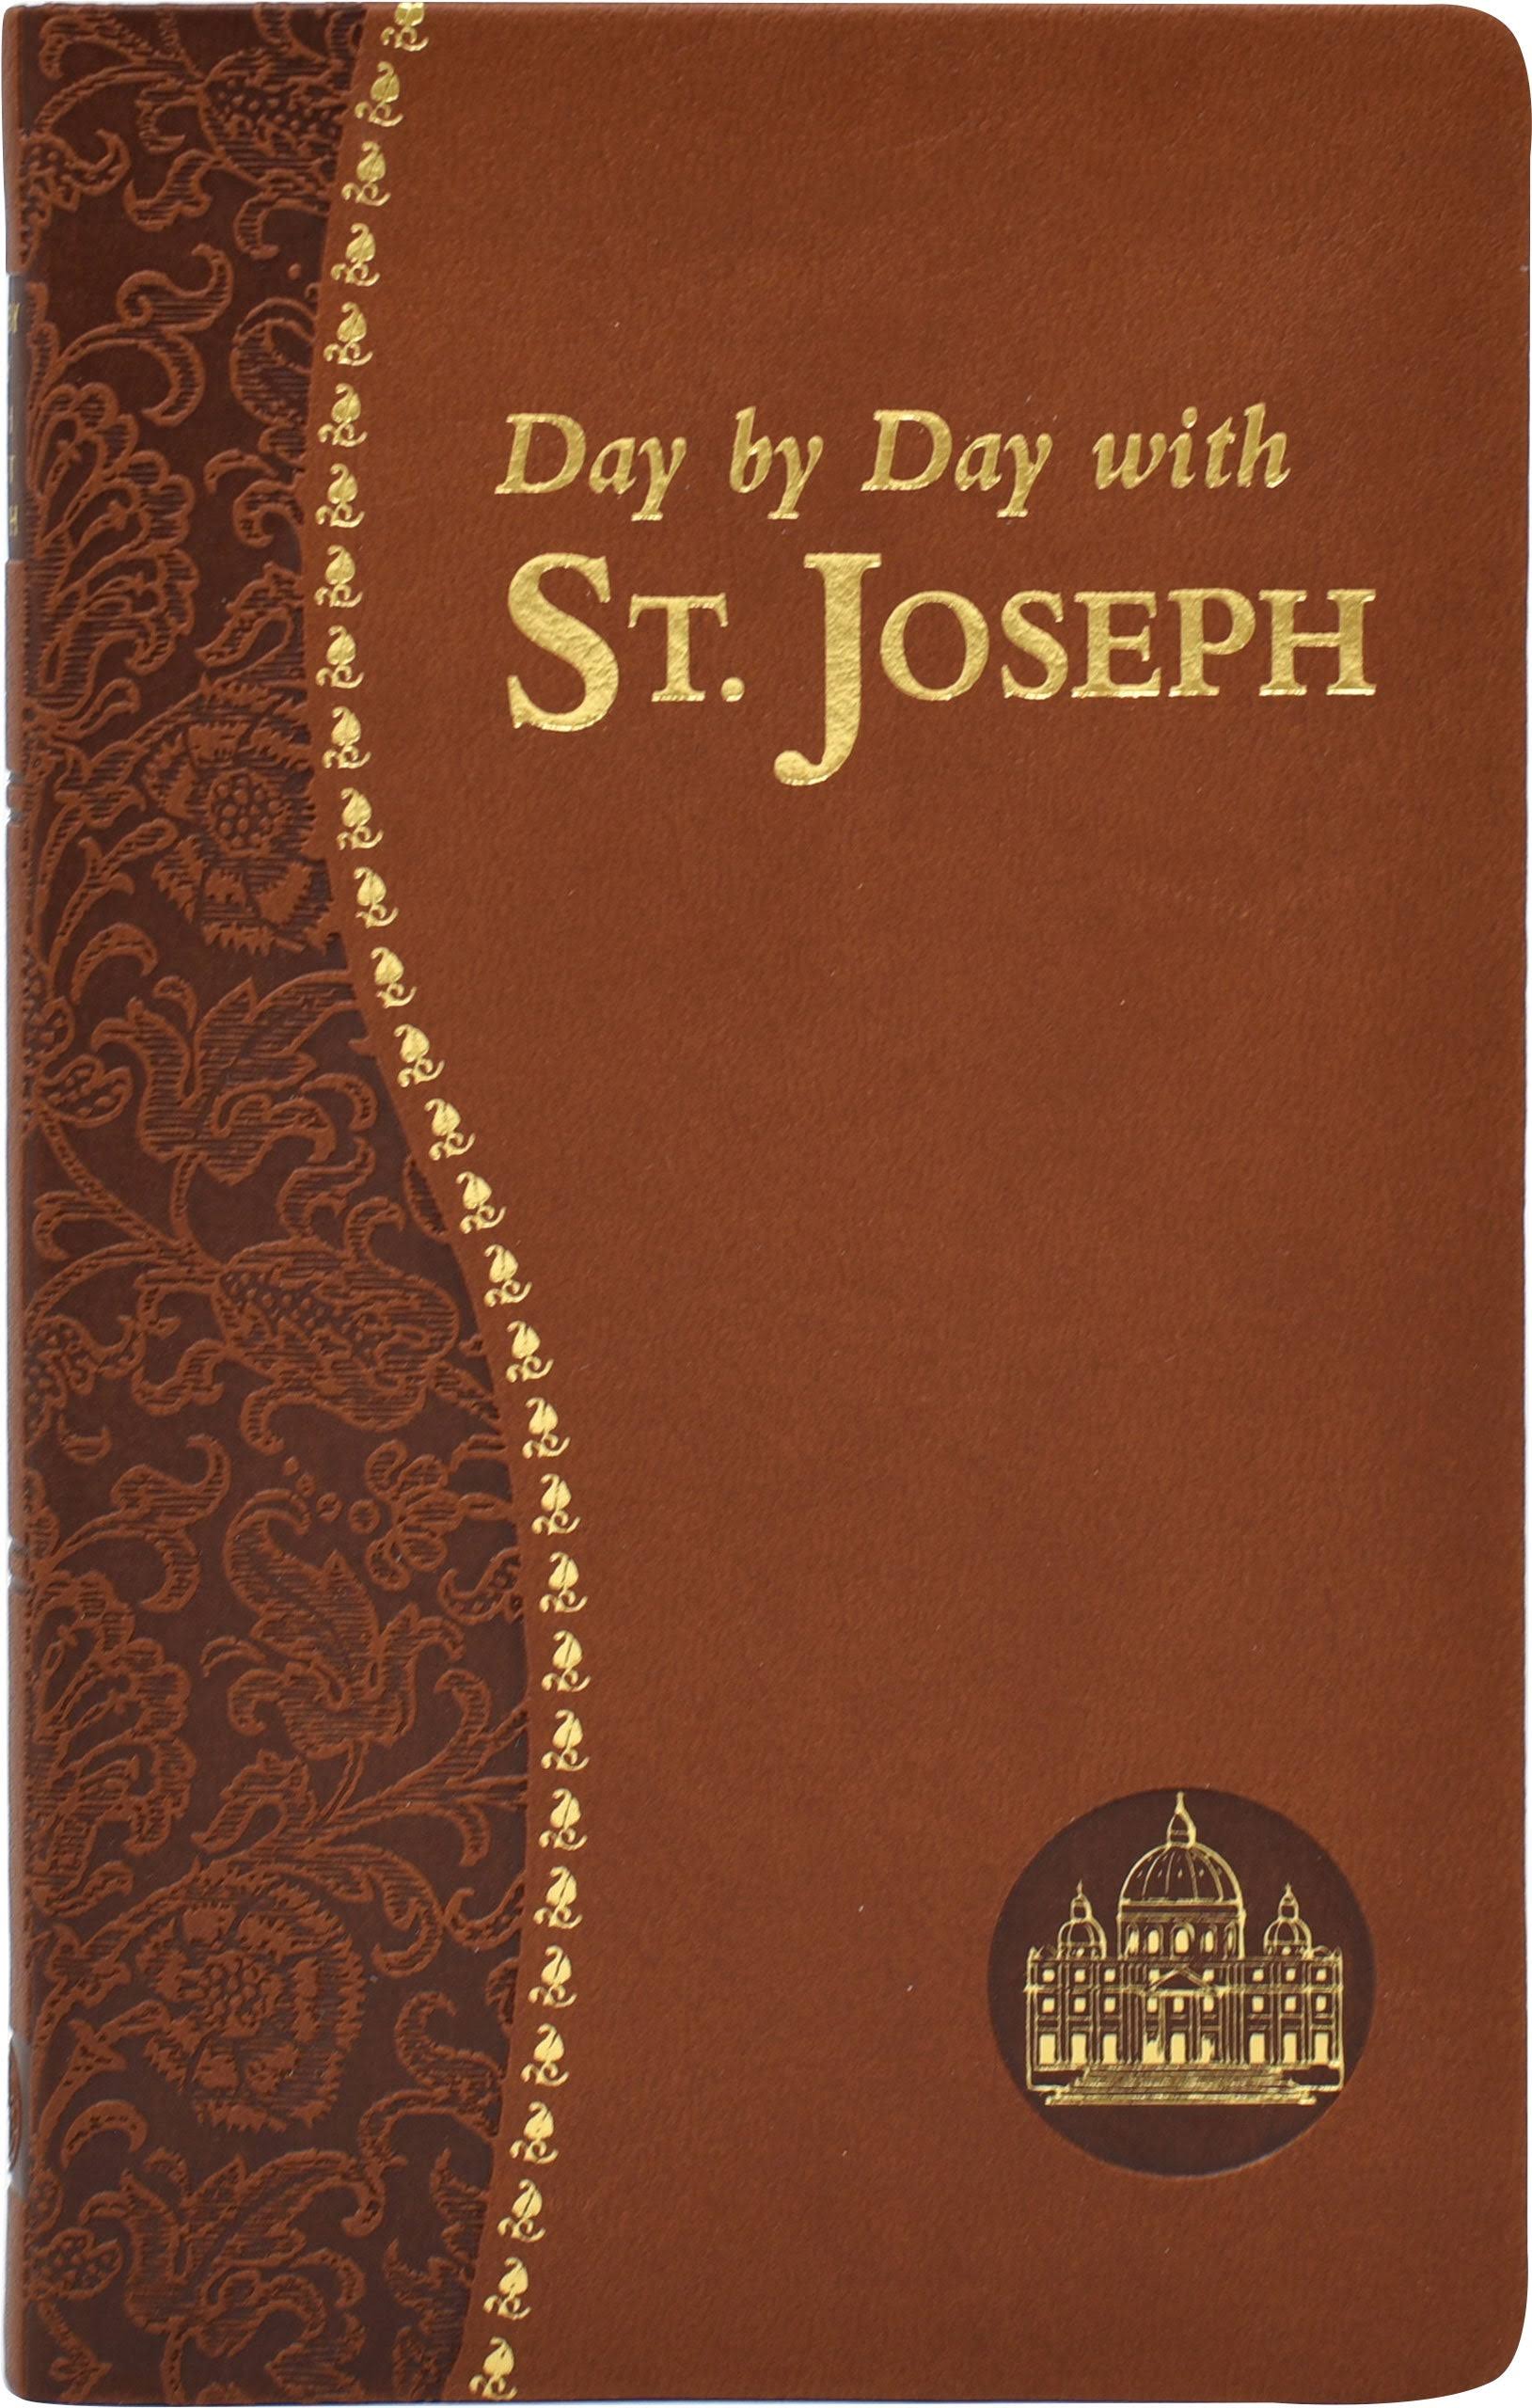 Day by Day with St. Joseph - Father Joseph Champlin